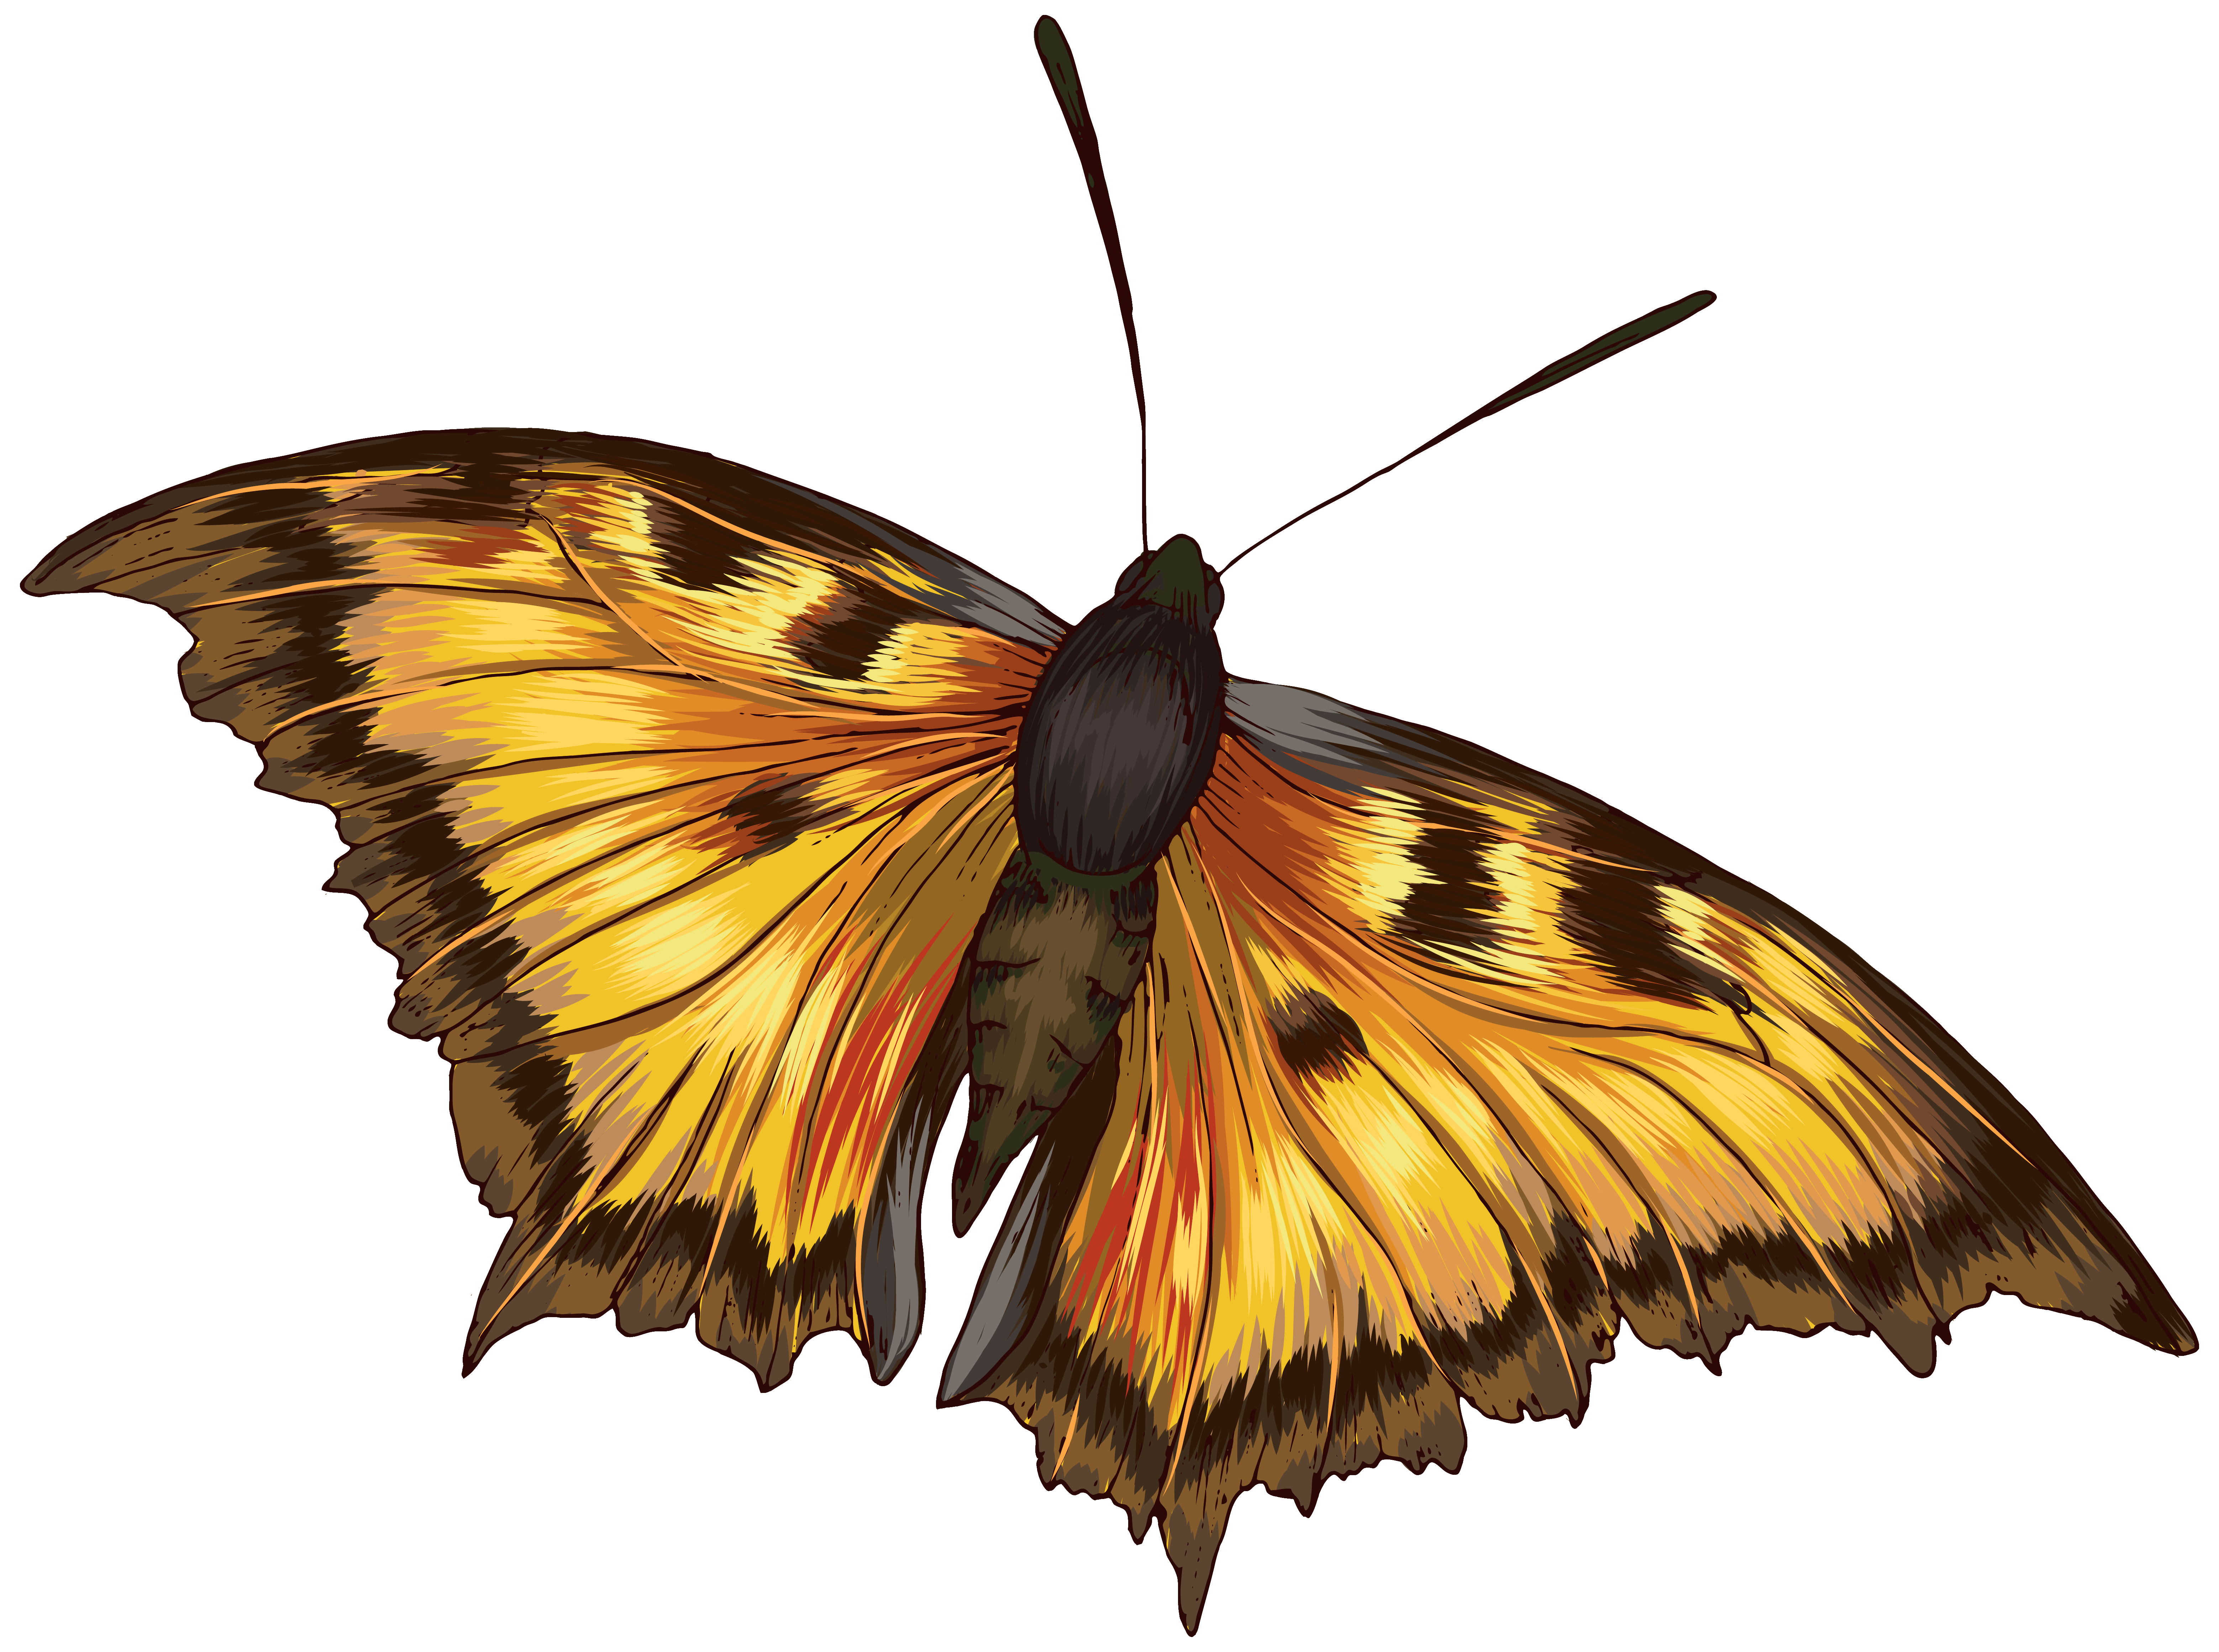 Butterfly Clipart PNG Image | Gallery Yopriceville - High-Quality Images and ...6235 x 4642